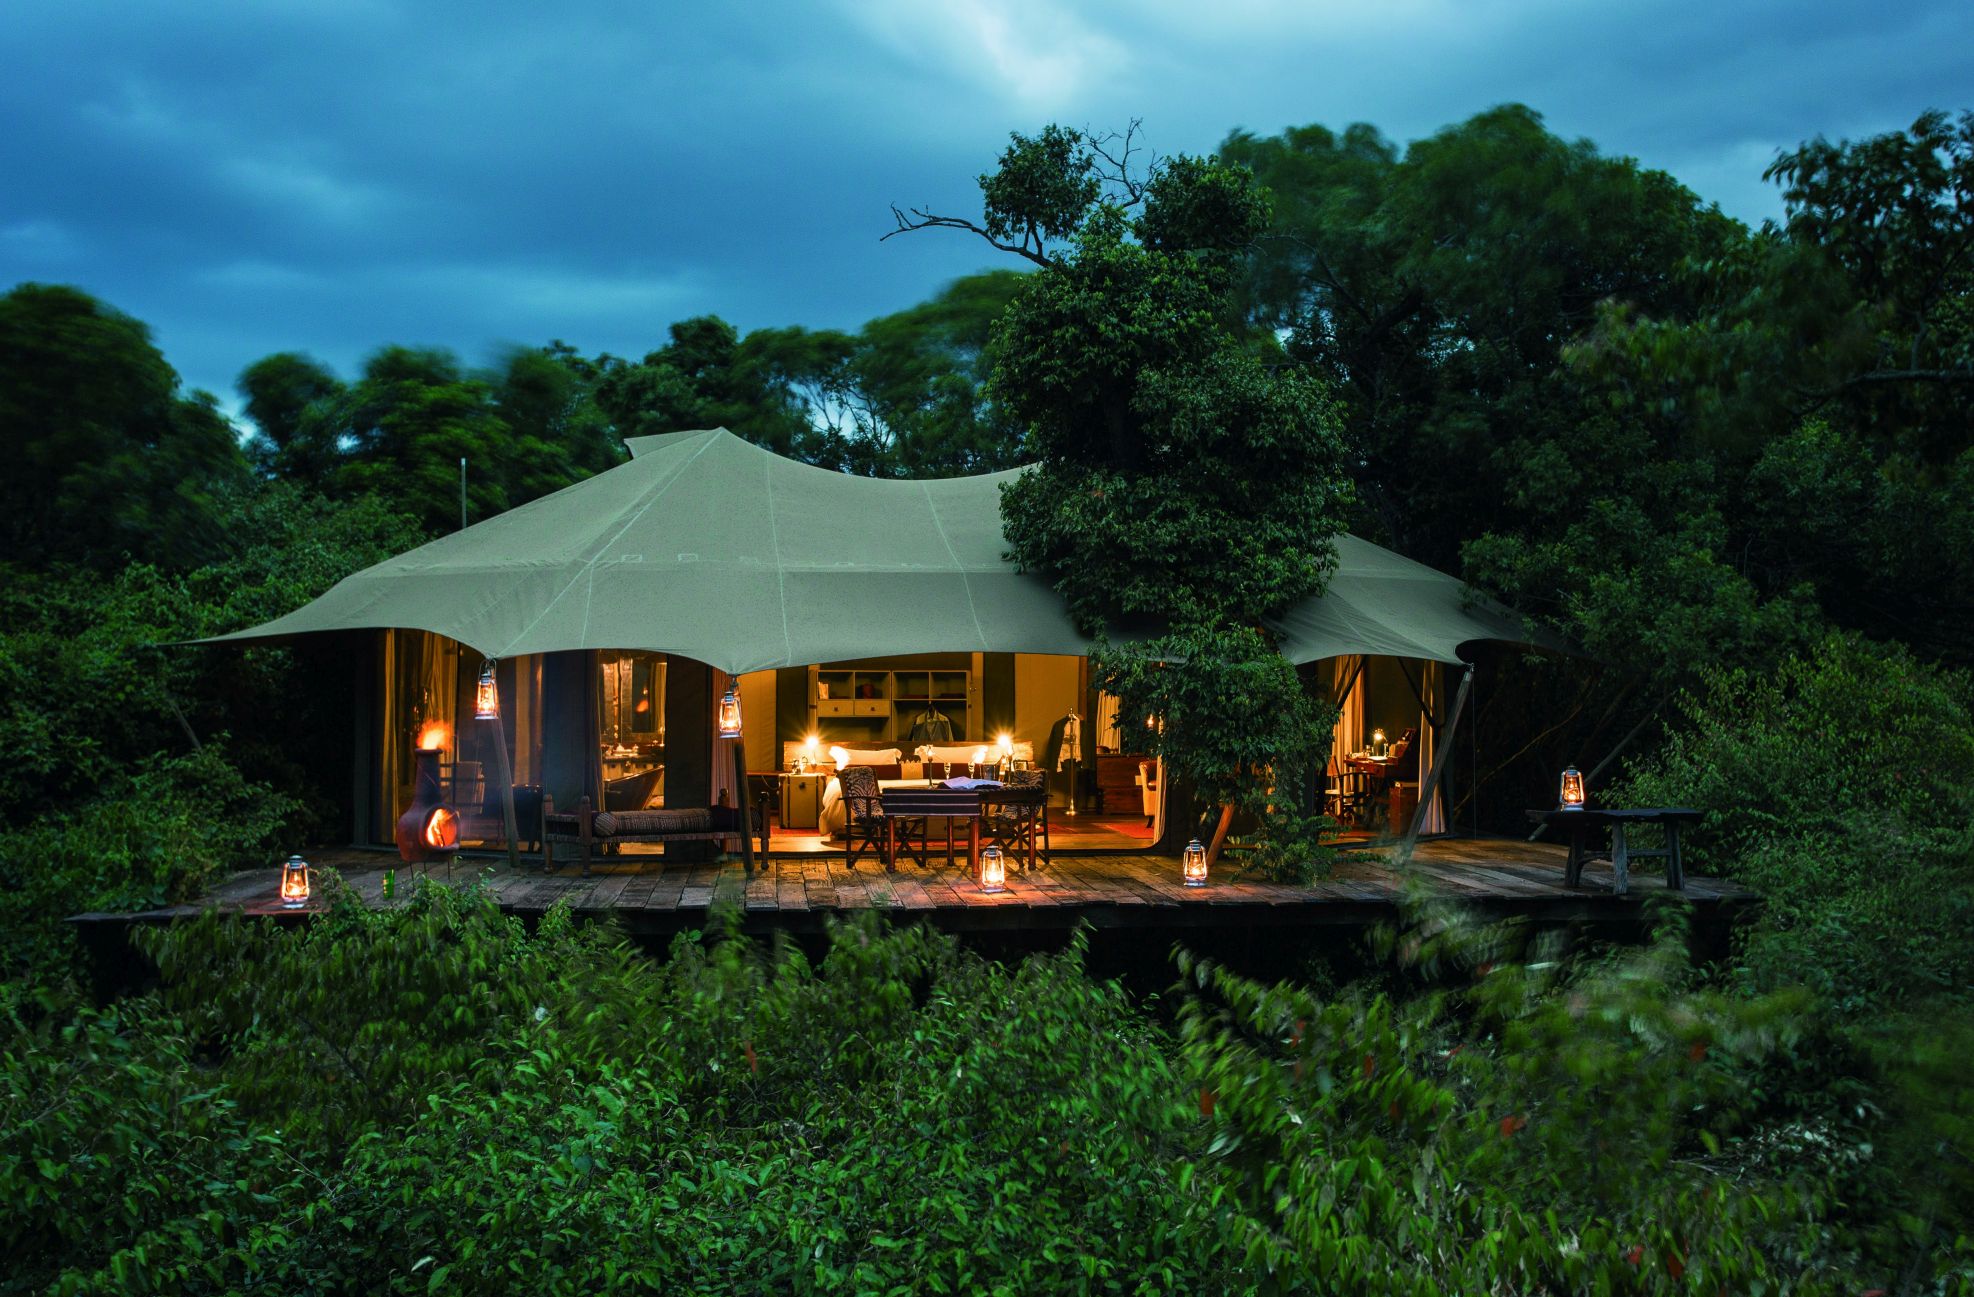 Great Plains will welcome Mara Toto and Mara plains, two stunning new safari camps in Kenya this summer.